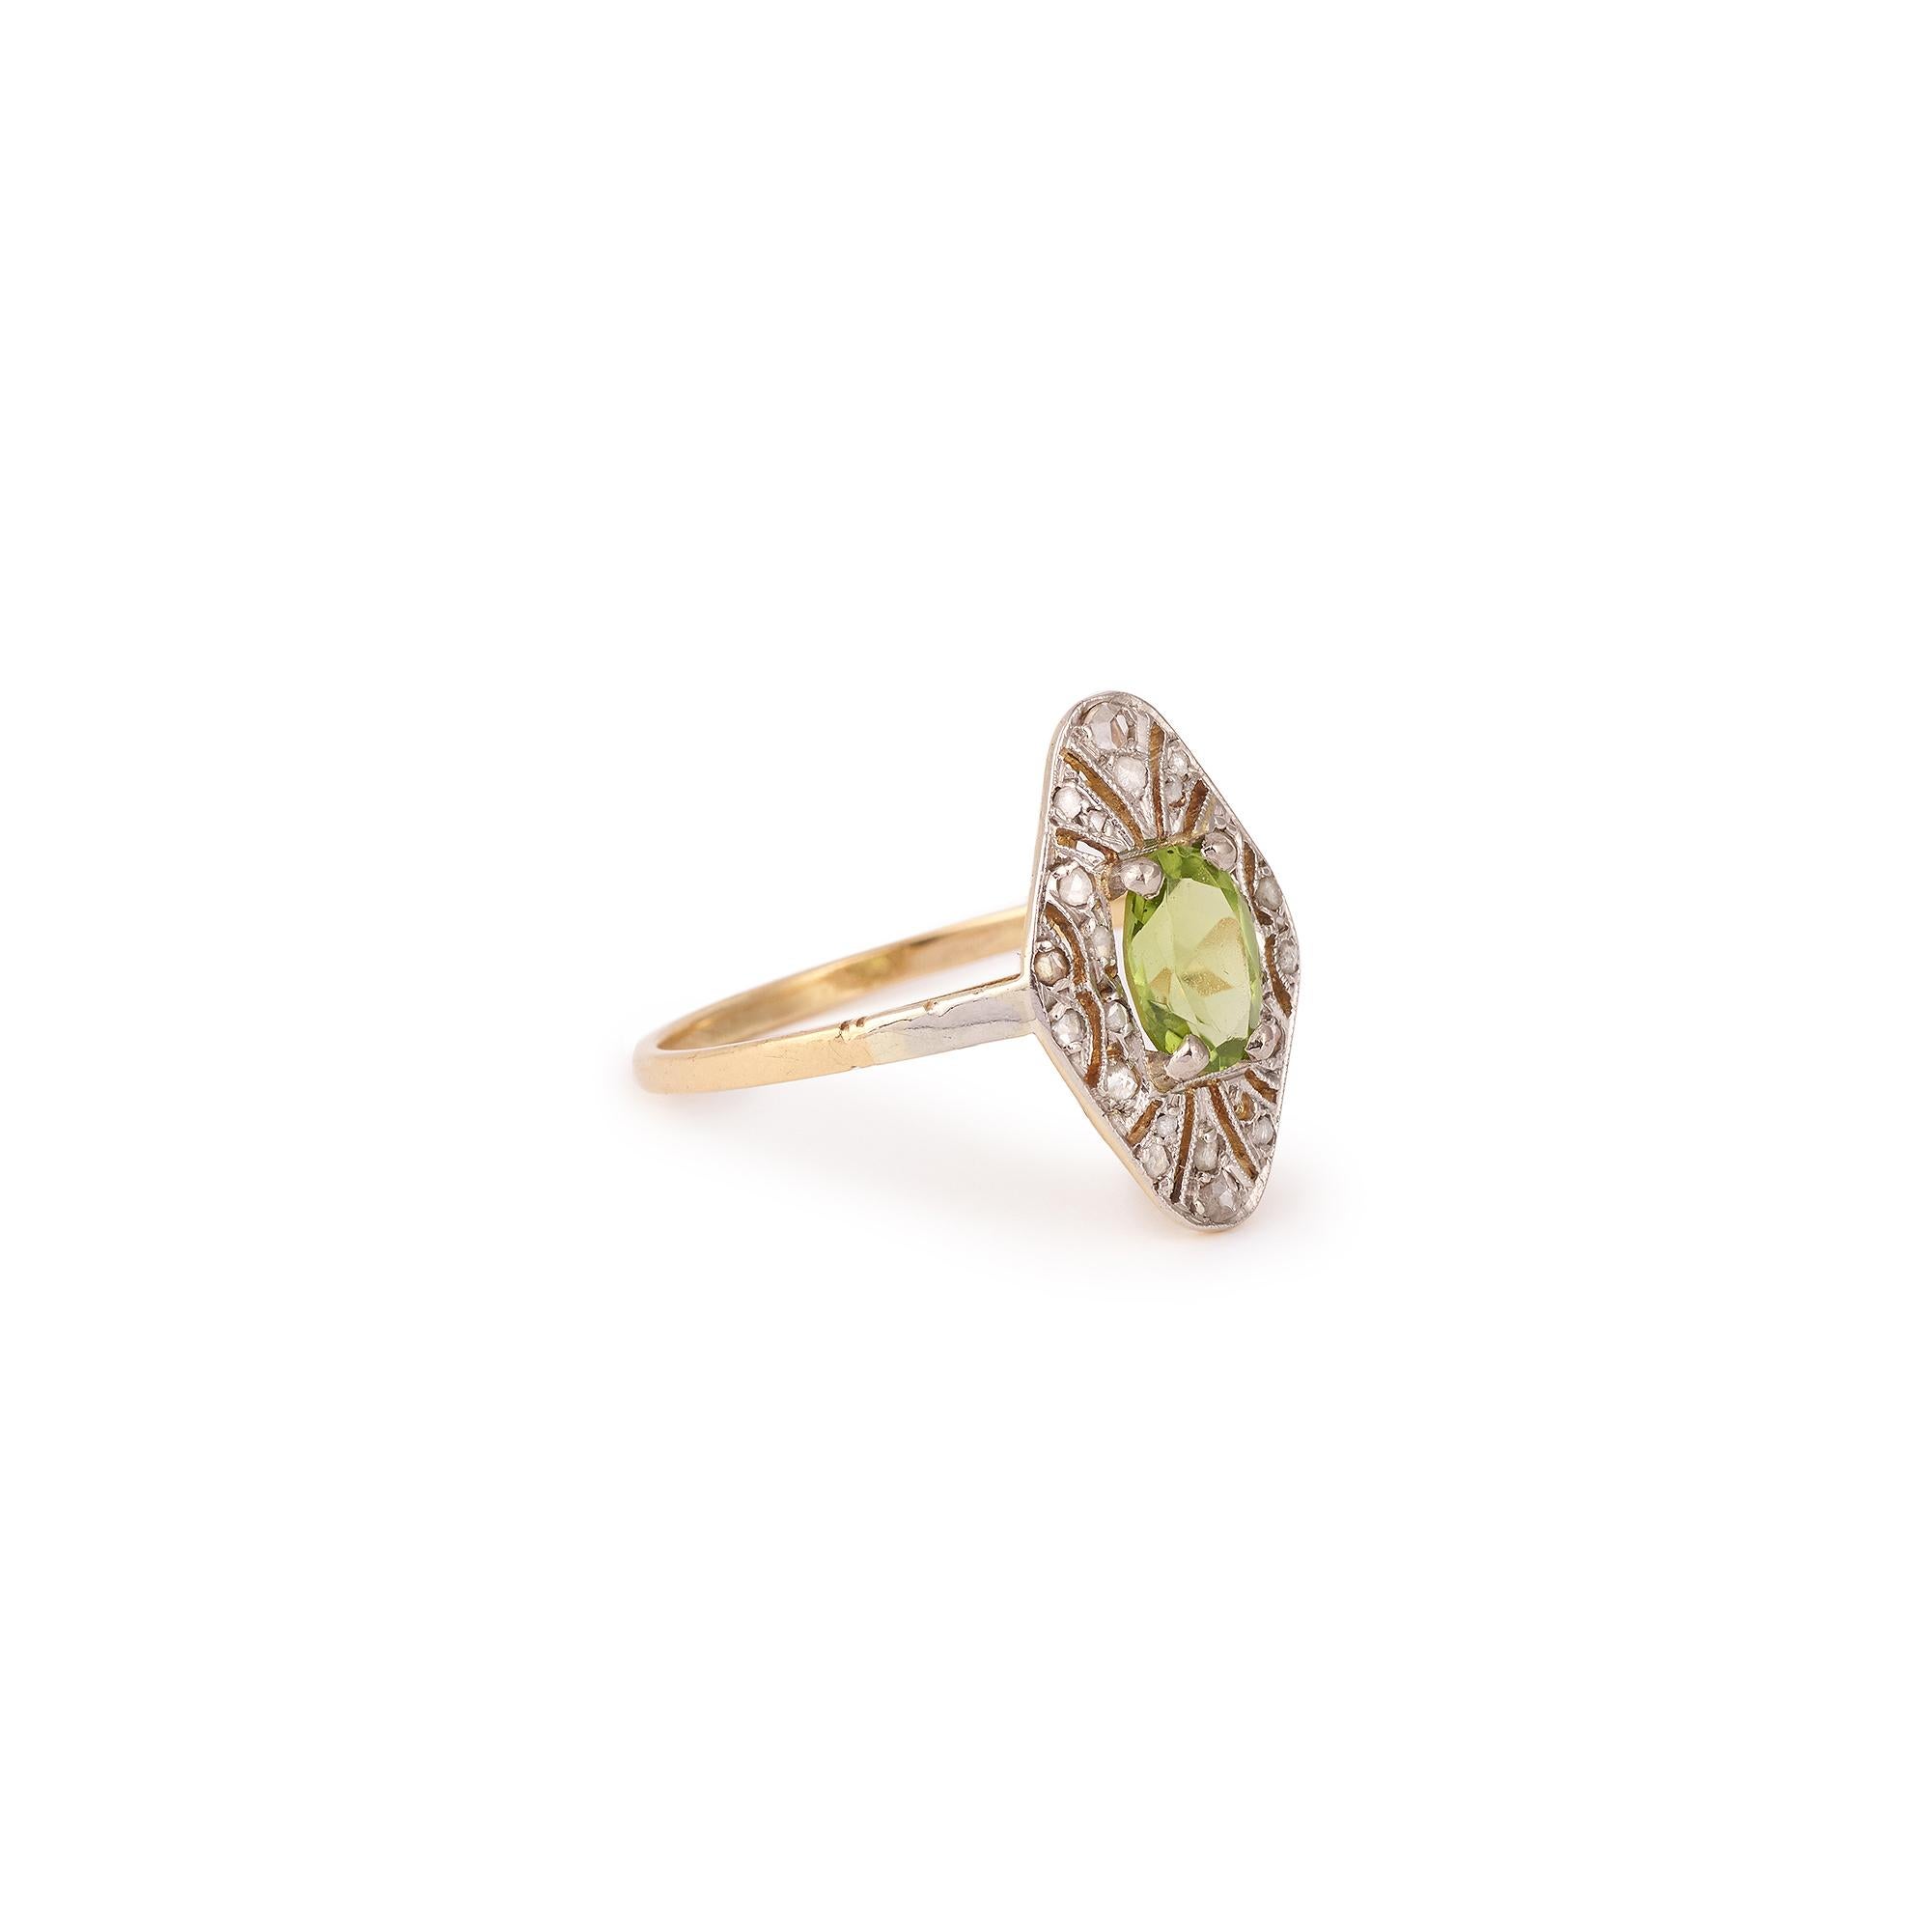 Yellow gold and platinum art nouveau ring set with rose cut diamonds and an oval cut peridot.

Weight of the peridot : 0.80 carats

Total weight of diamonds : 0.18 carats

Dimensions : 16.67 x 10.94 x 4.25 mm ( 0.657 x 0.450 x 0.167 inch)

Finger